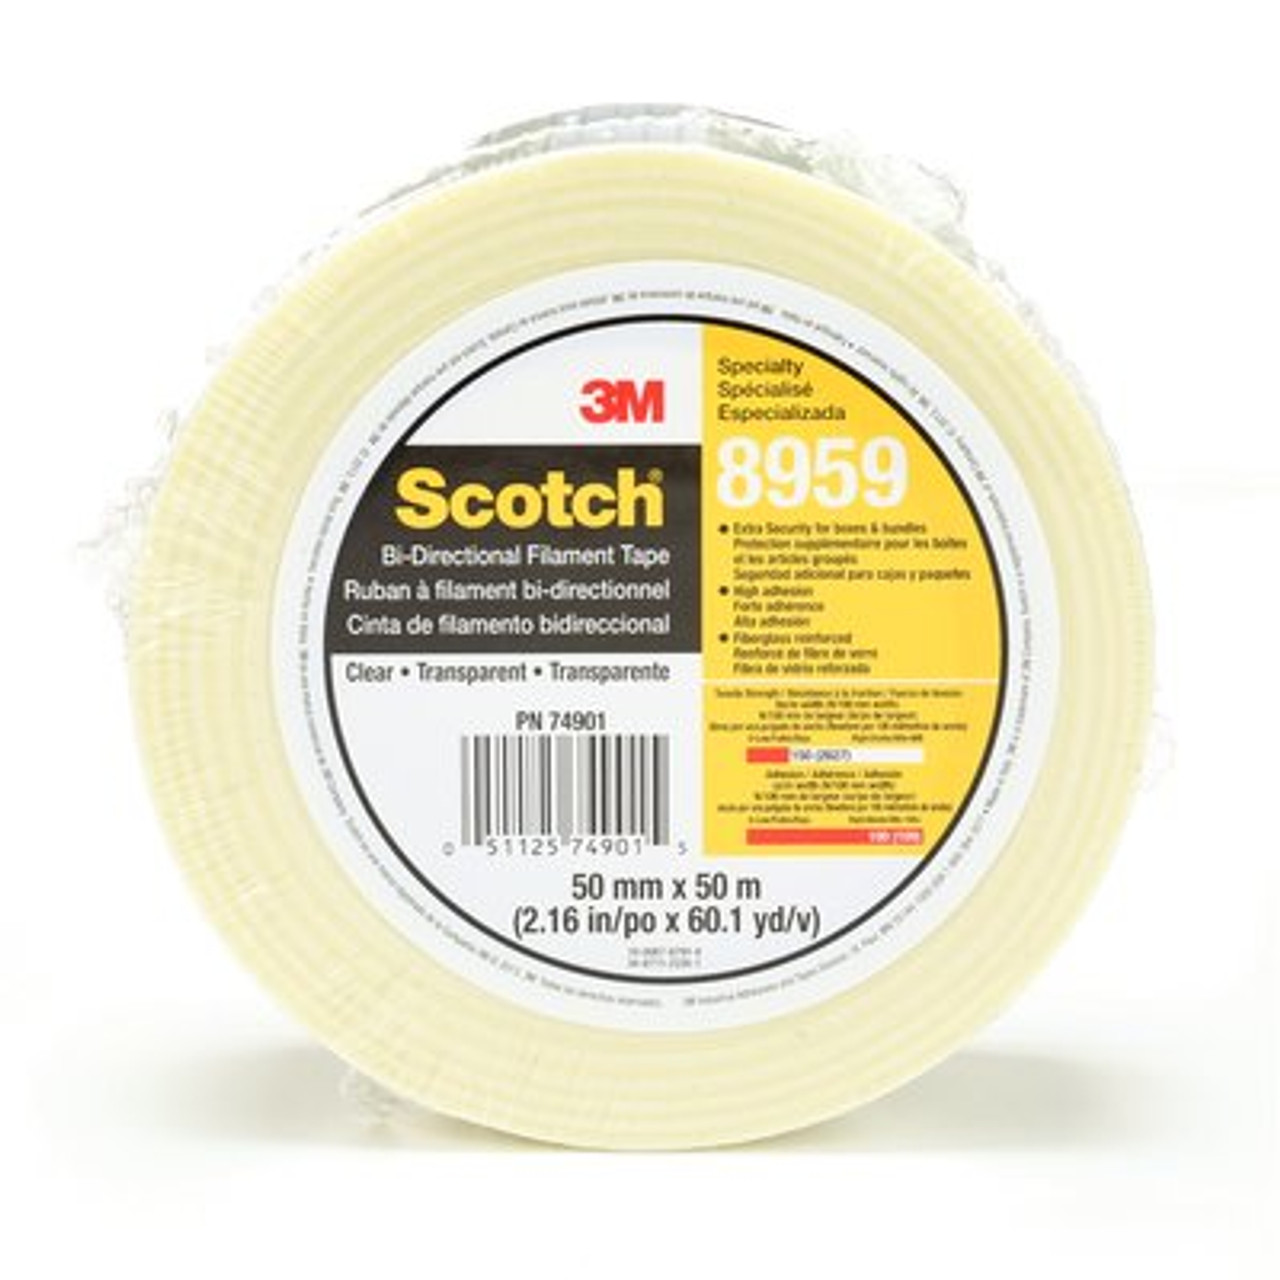 Scotch® Bi-Directional Filament Tape 8959, Transparent, (2") 50 mm x 50 m, 18 rolls per case, individually wrapped conveniently packaged